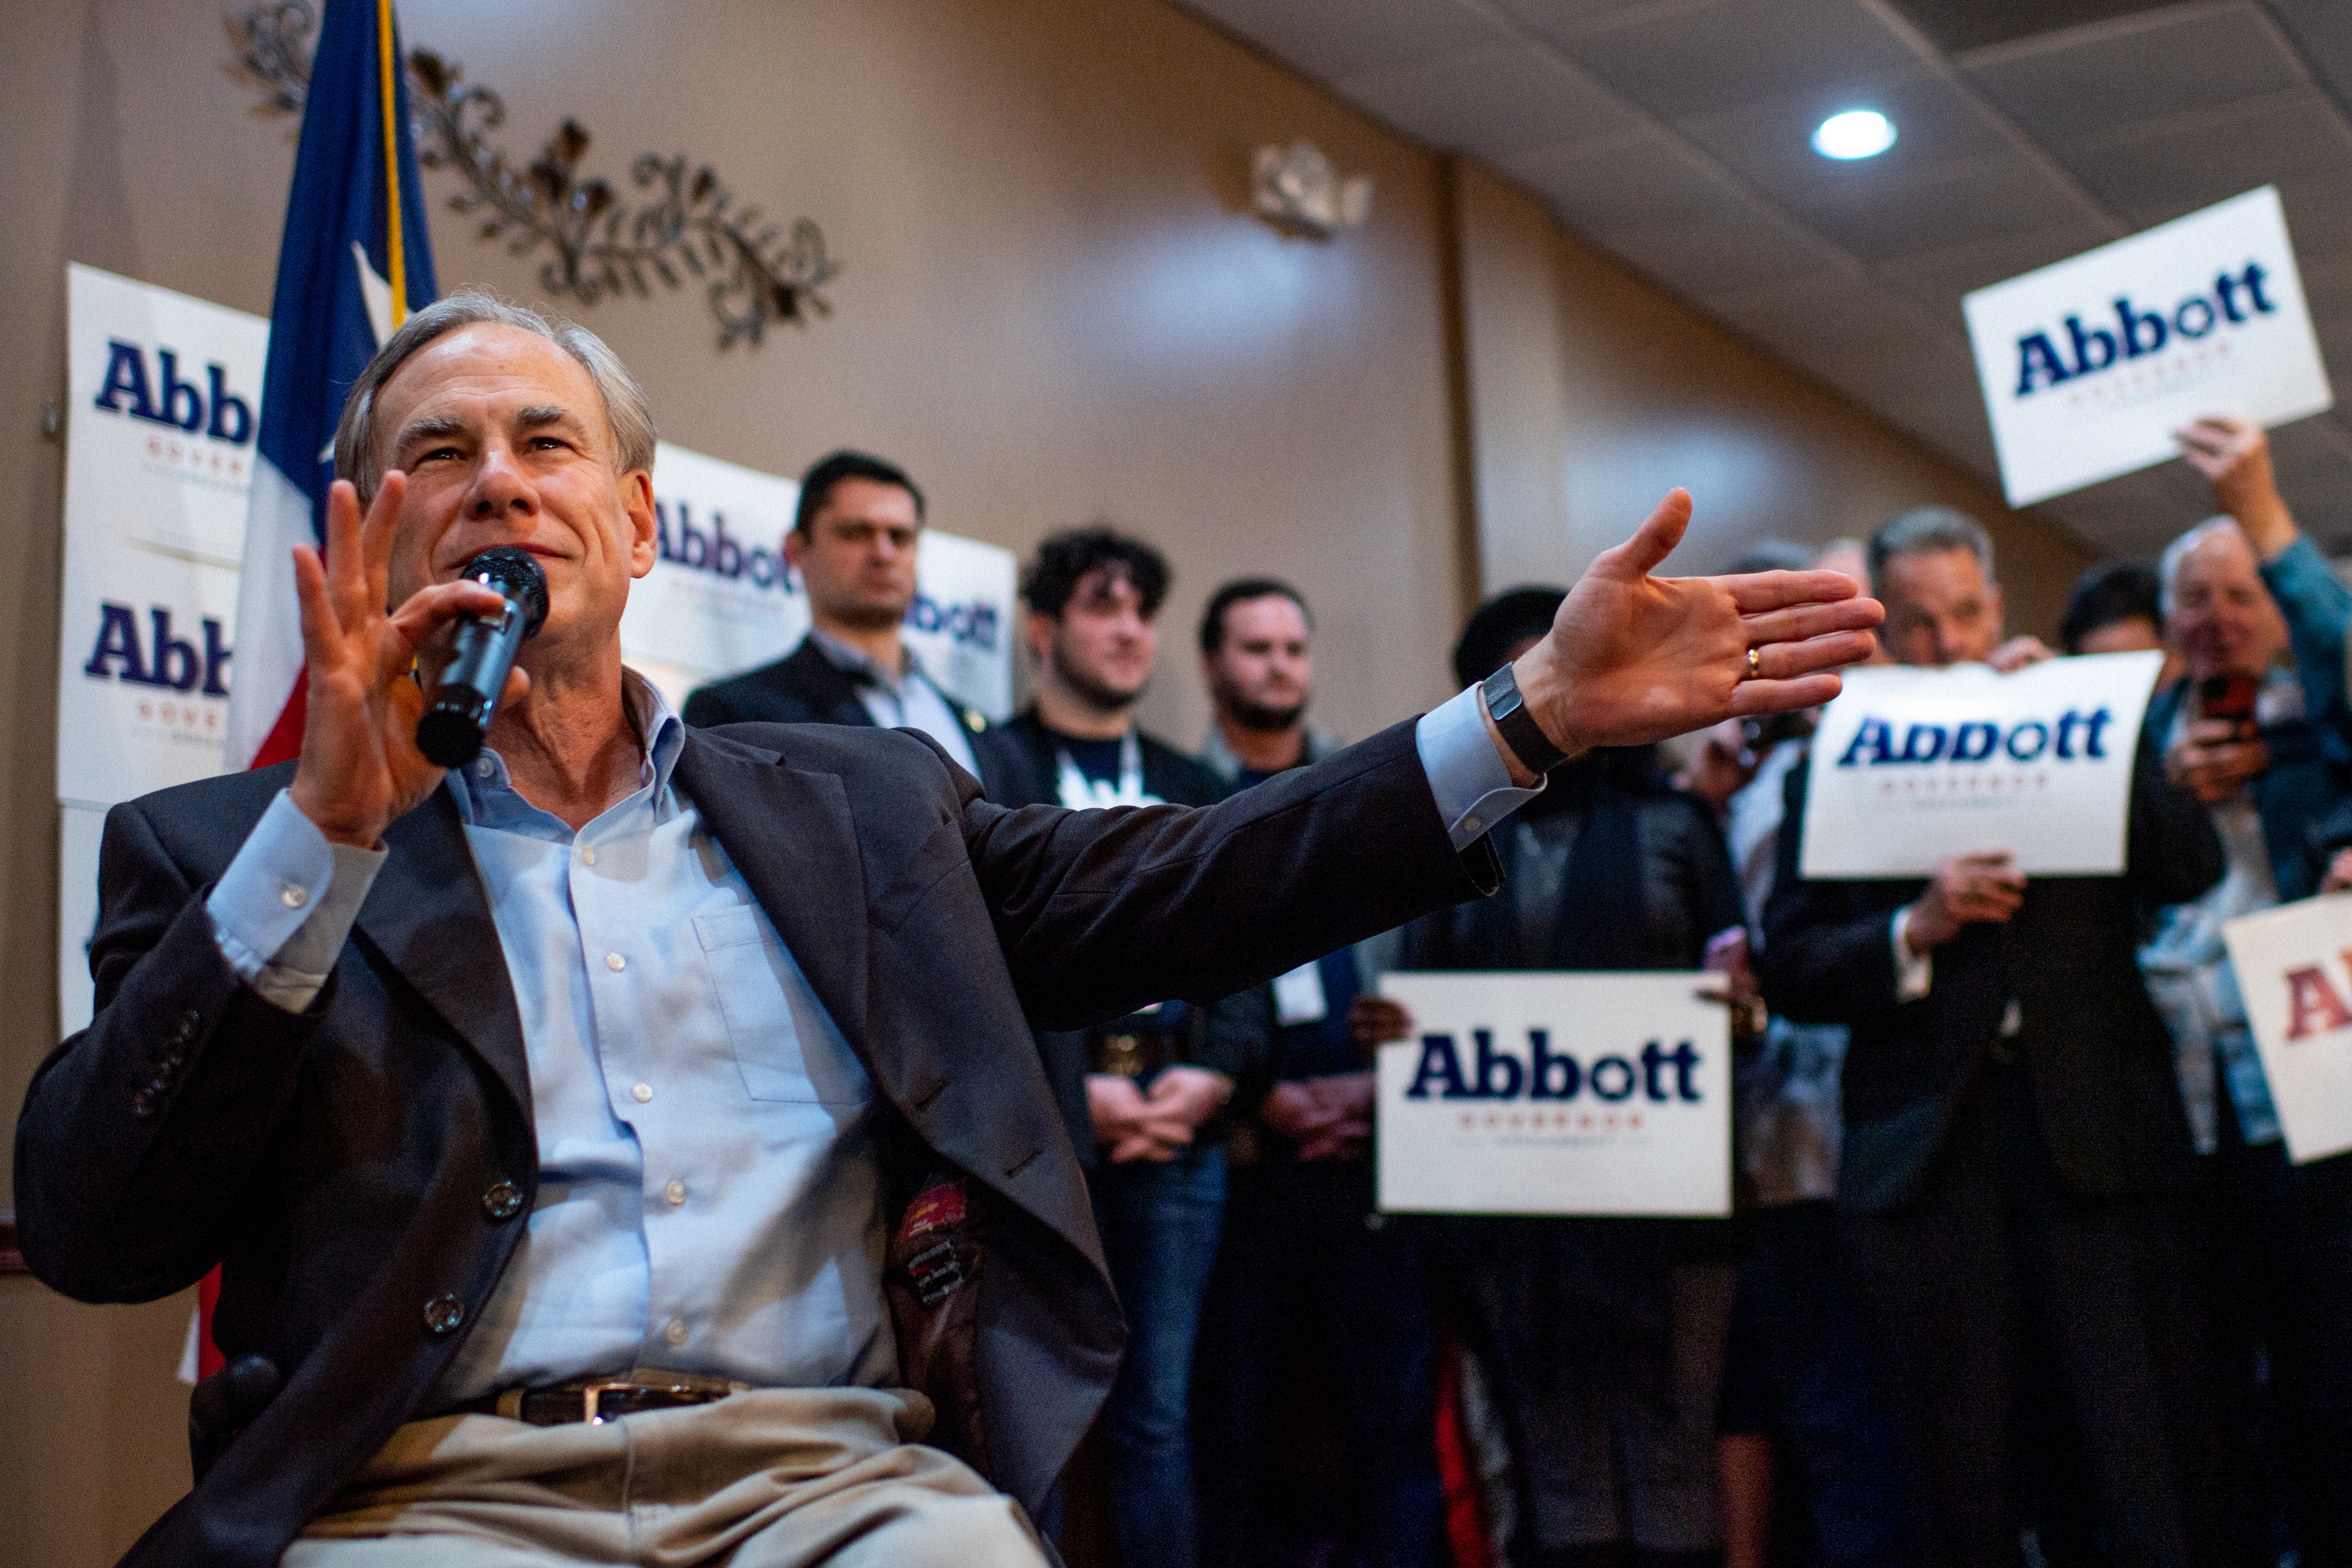 A man with a microphone in front of a crowd of men with “Abbott” campaign signs